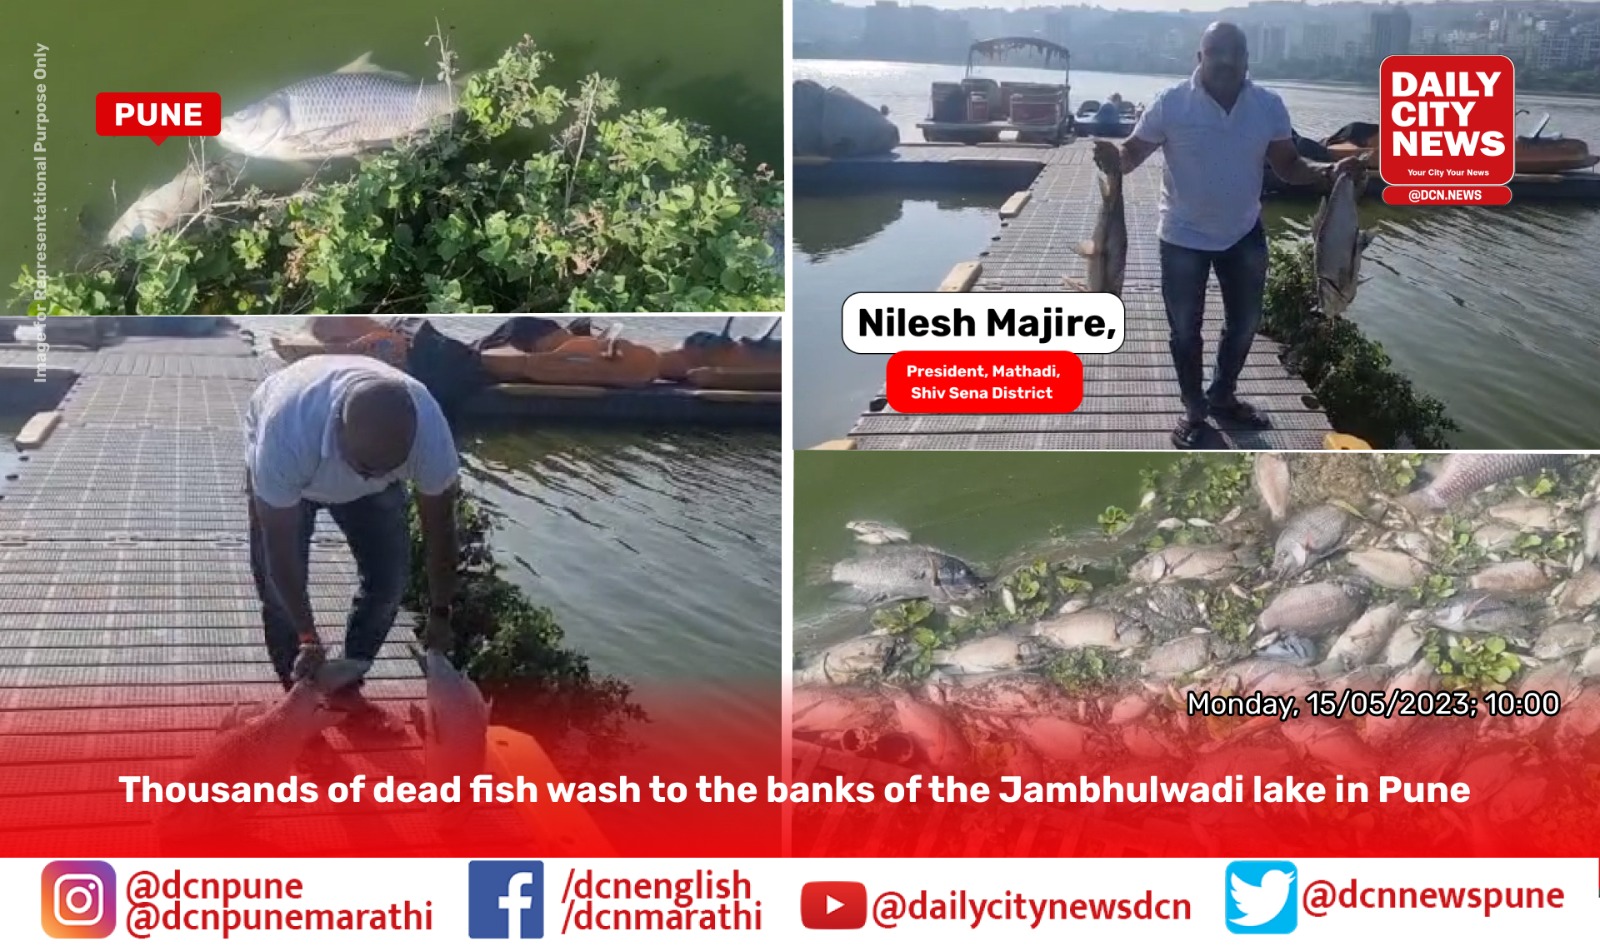 Thousands of dead fish wash to the banks of the Jambhulwadi lake in Pune